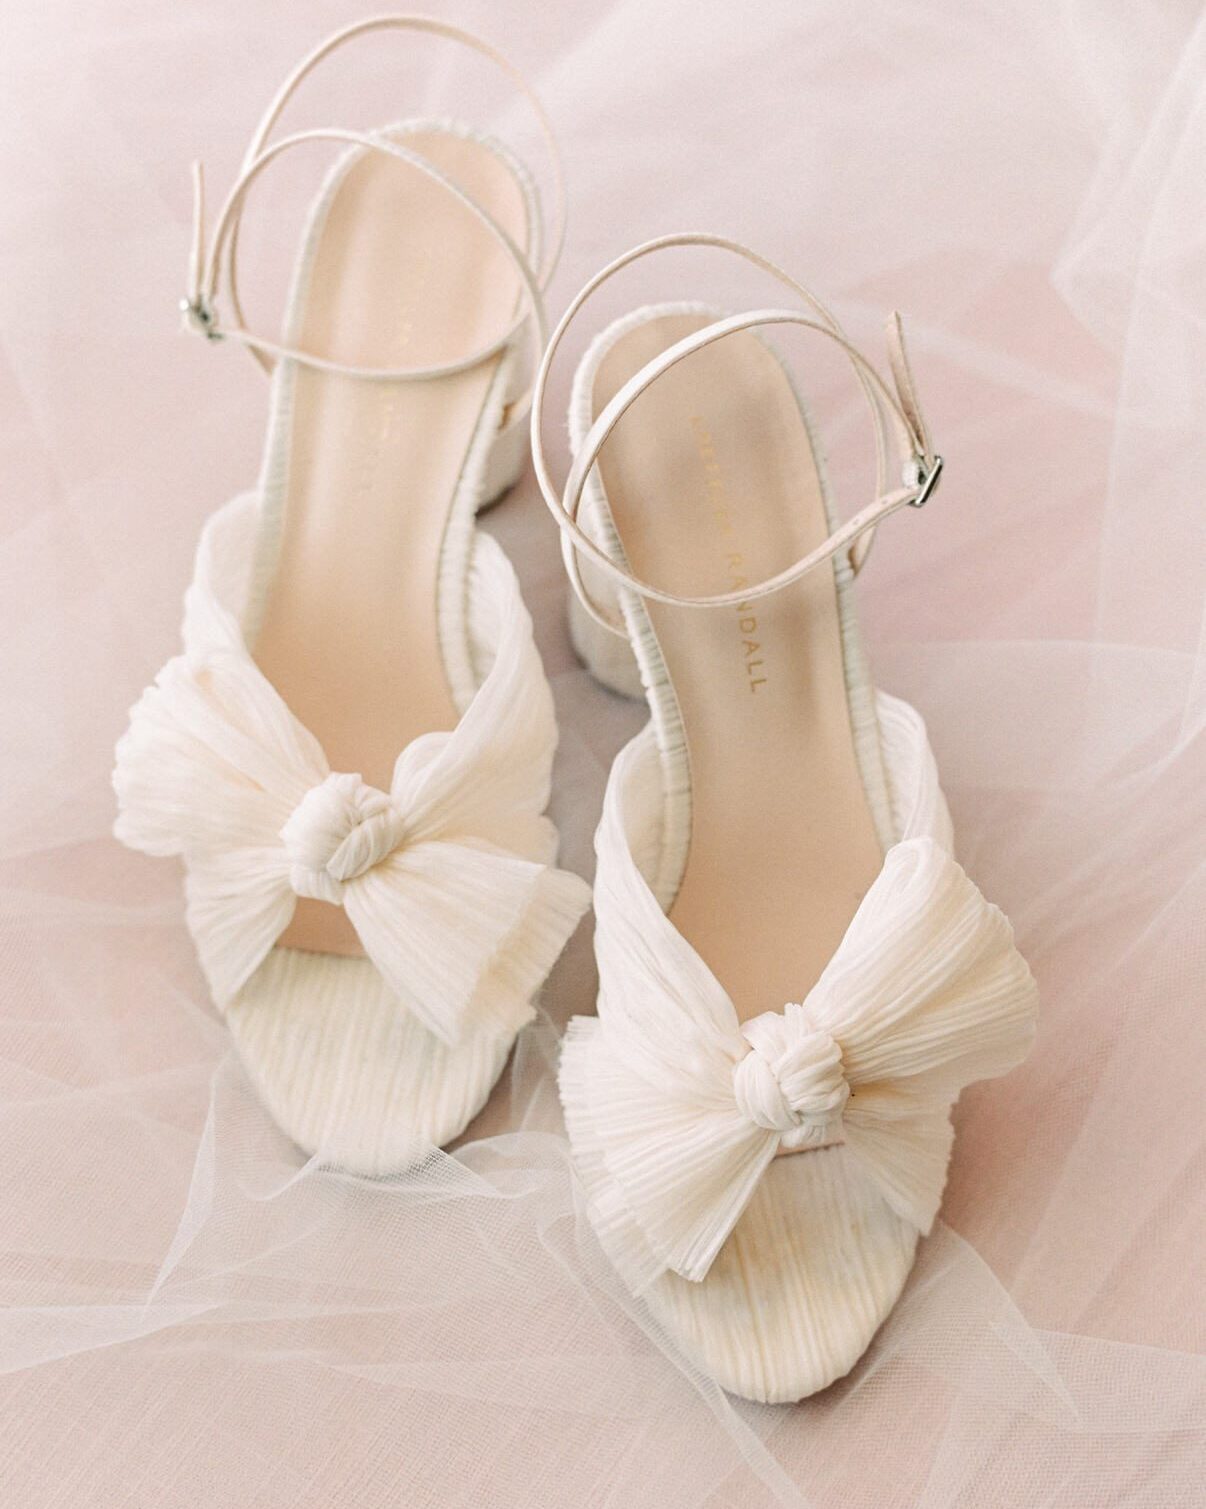 wedding day bridal shoes by white barn edna valley photographer Jessica Sofranko